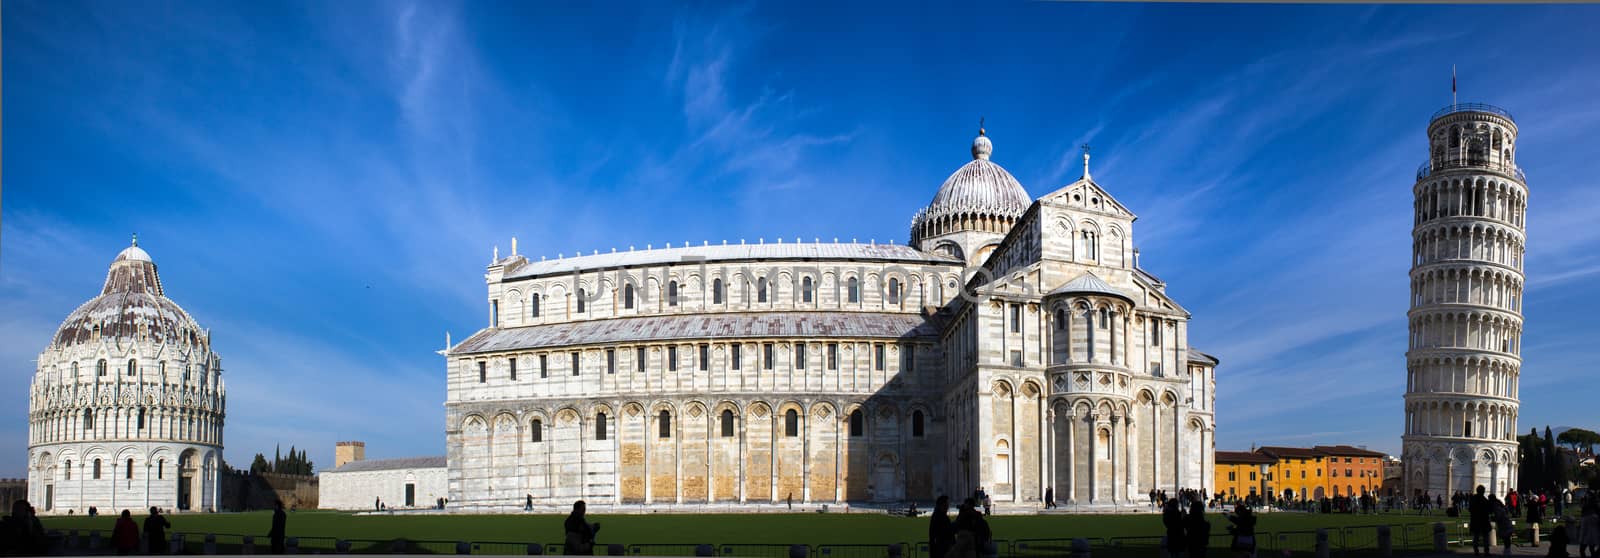 Pisa, place of miracles: the leaning tower and the cathedral baptistery